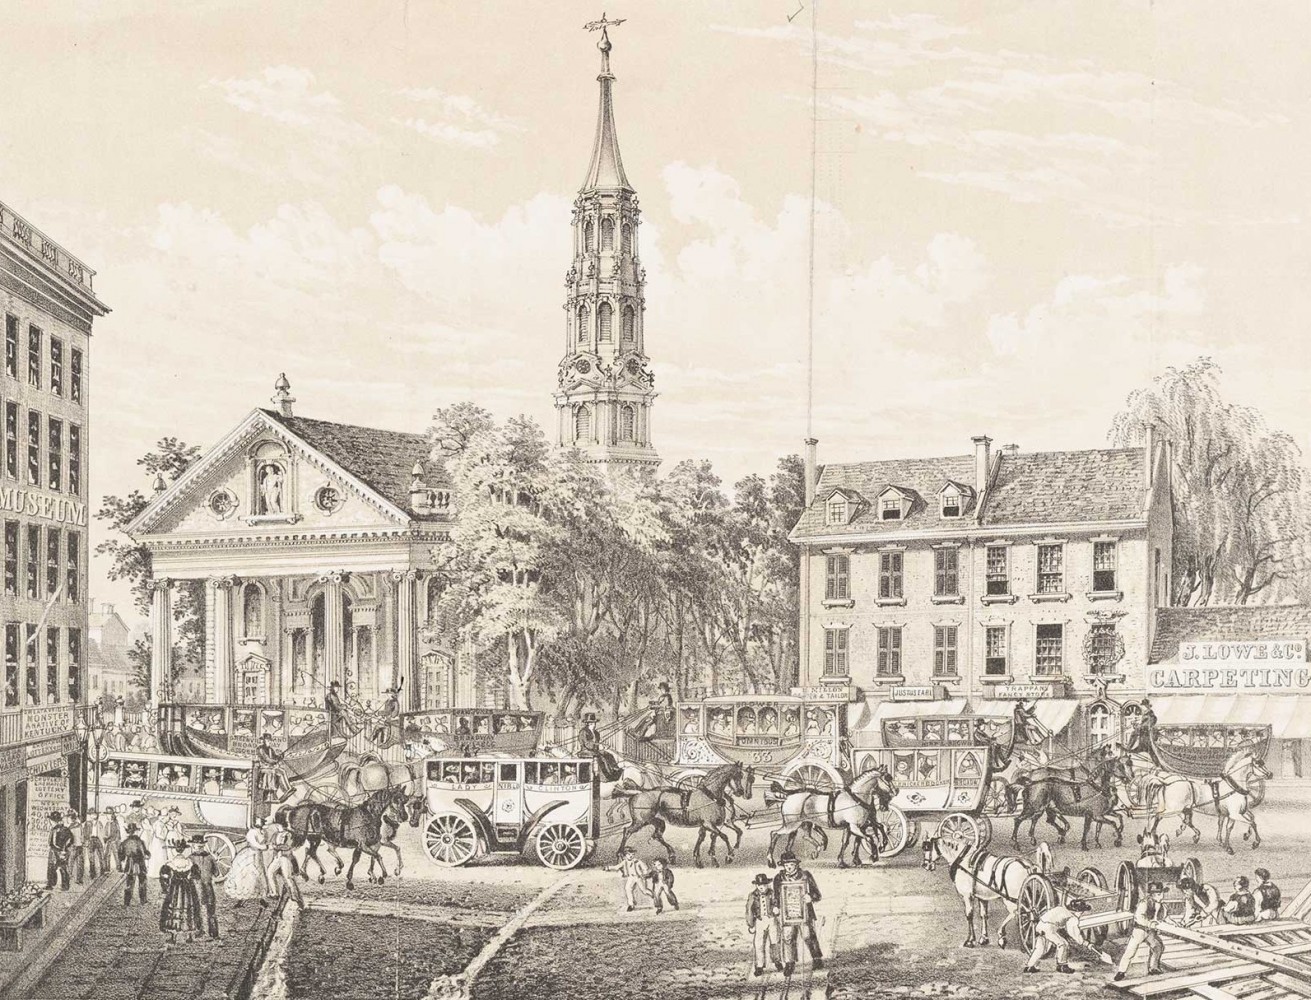 Image of Broadway and Ann, c. 1830